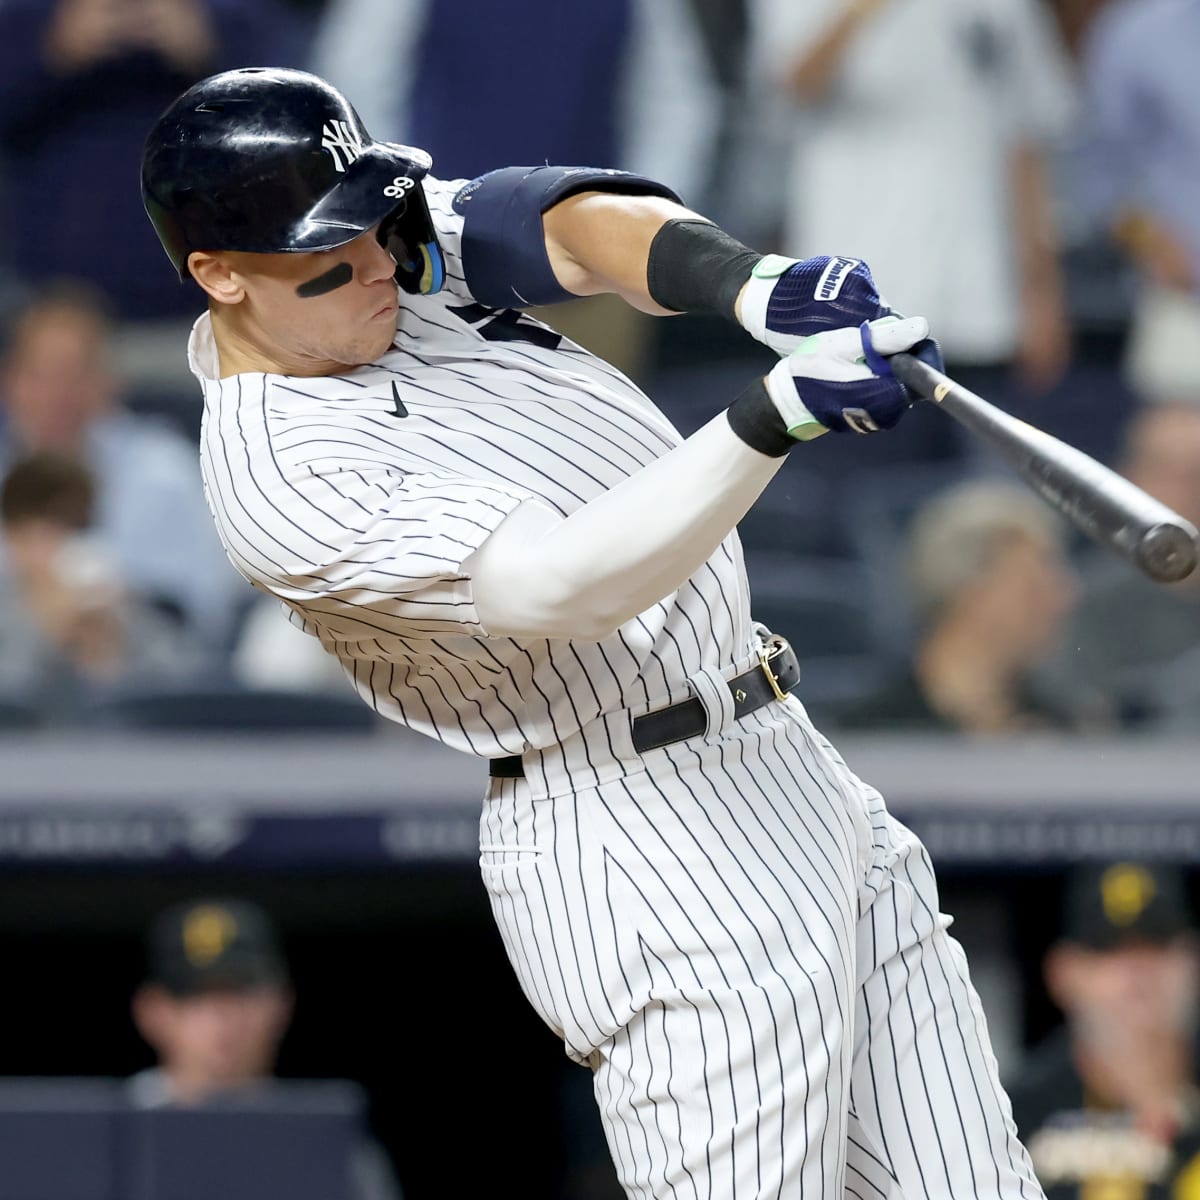 Cory Youmans reflects on catching Aaron Judge's home run ball